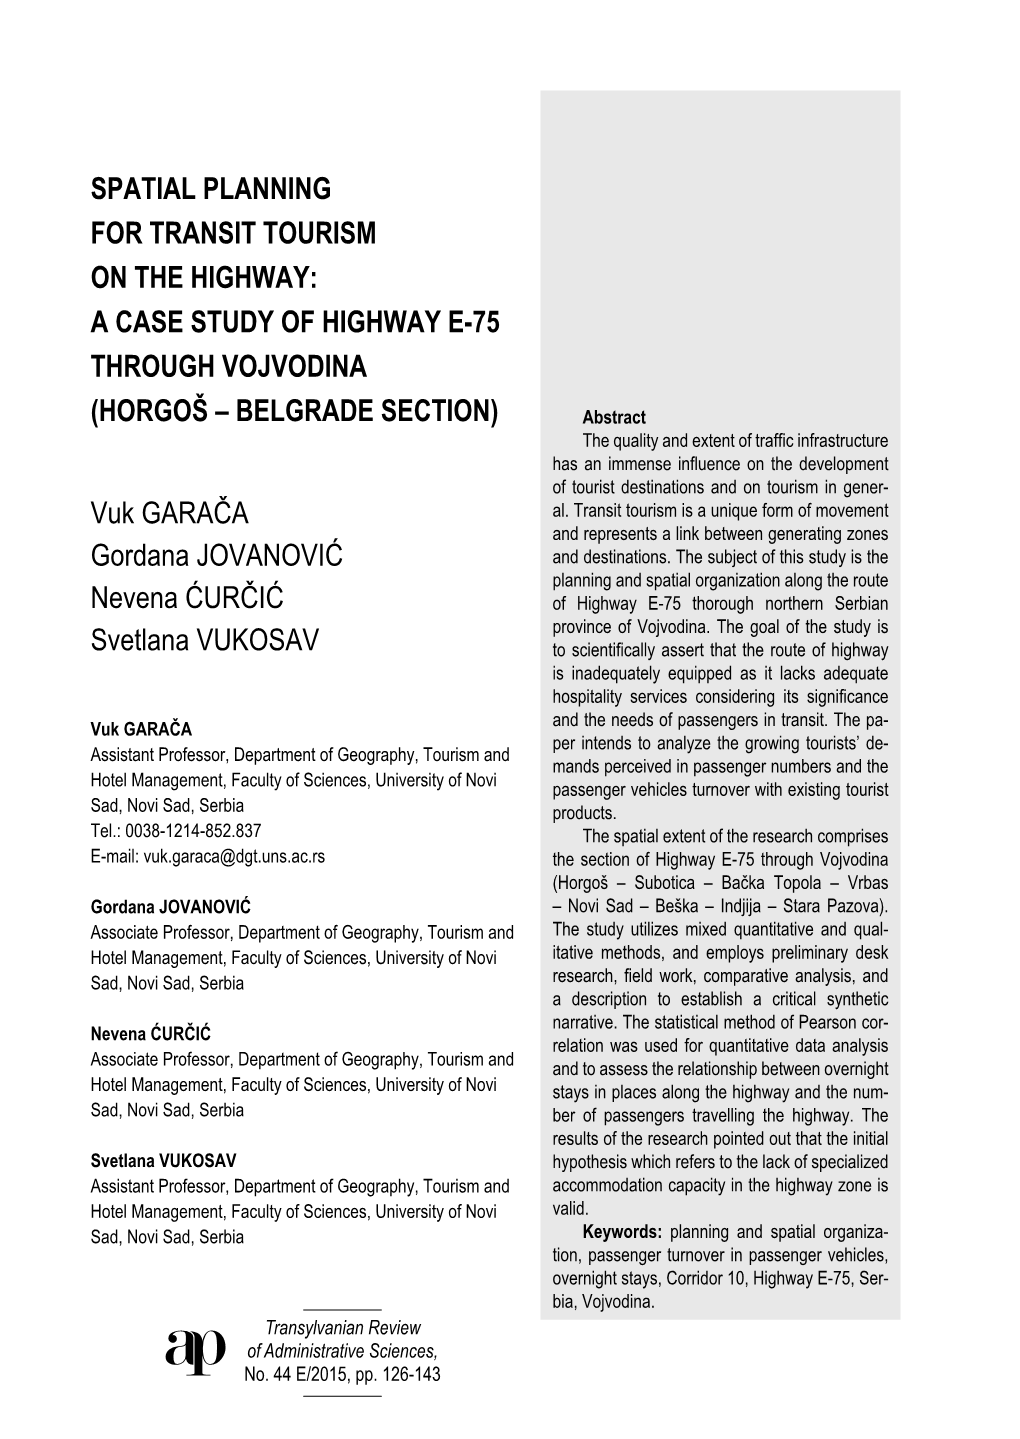 Spatial Planning for Transit Tourism on the Highway: a Case Study of Highway Е-75 Through Vojvodina